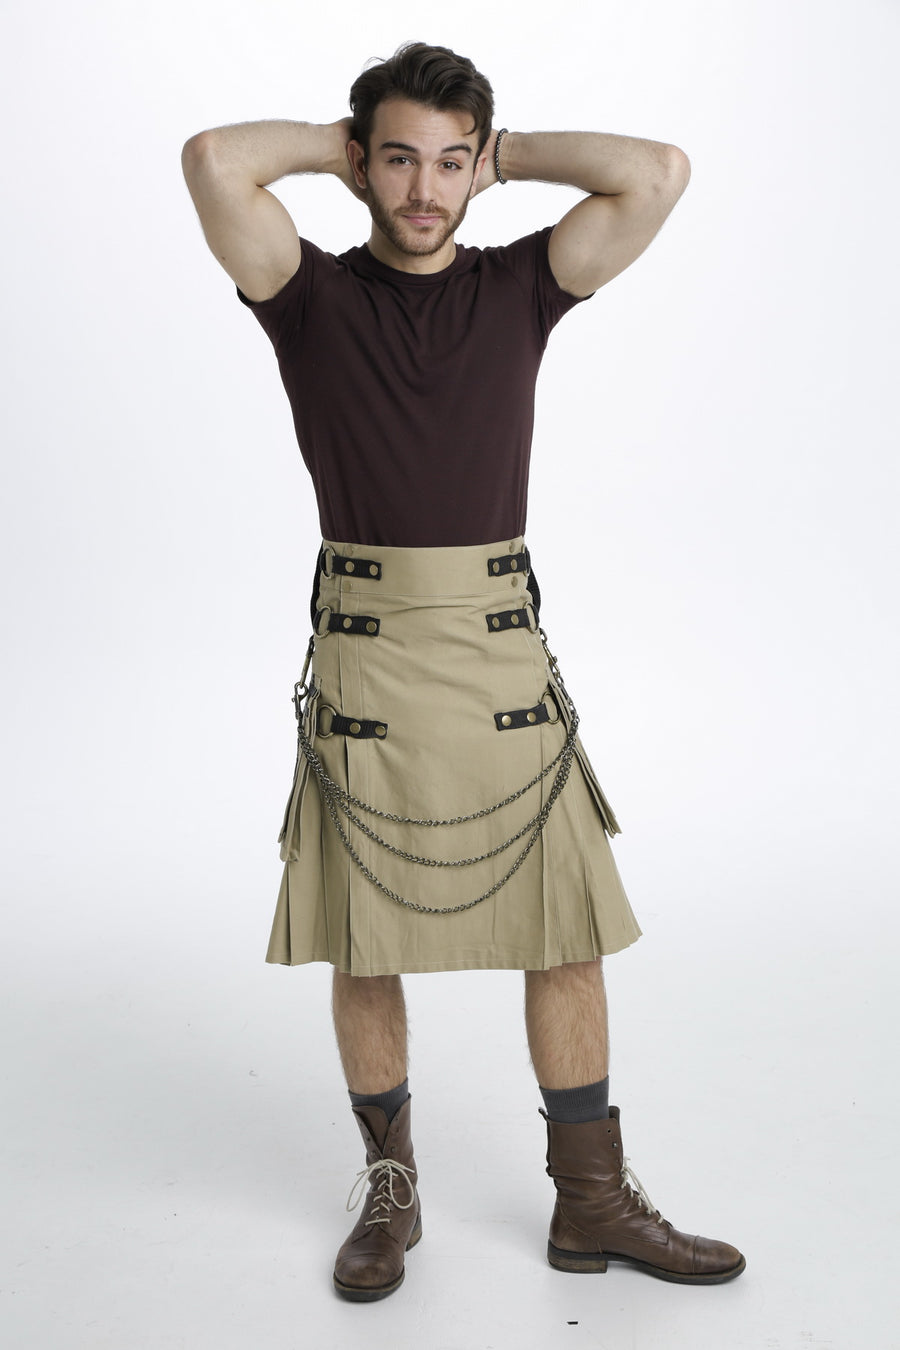 	 Are you looking for an Ultimate Kilt? Our Ultimate Utility Kilt will let you step out in style without leaving behind any of your important belongings. 